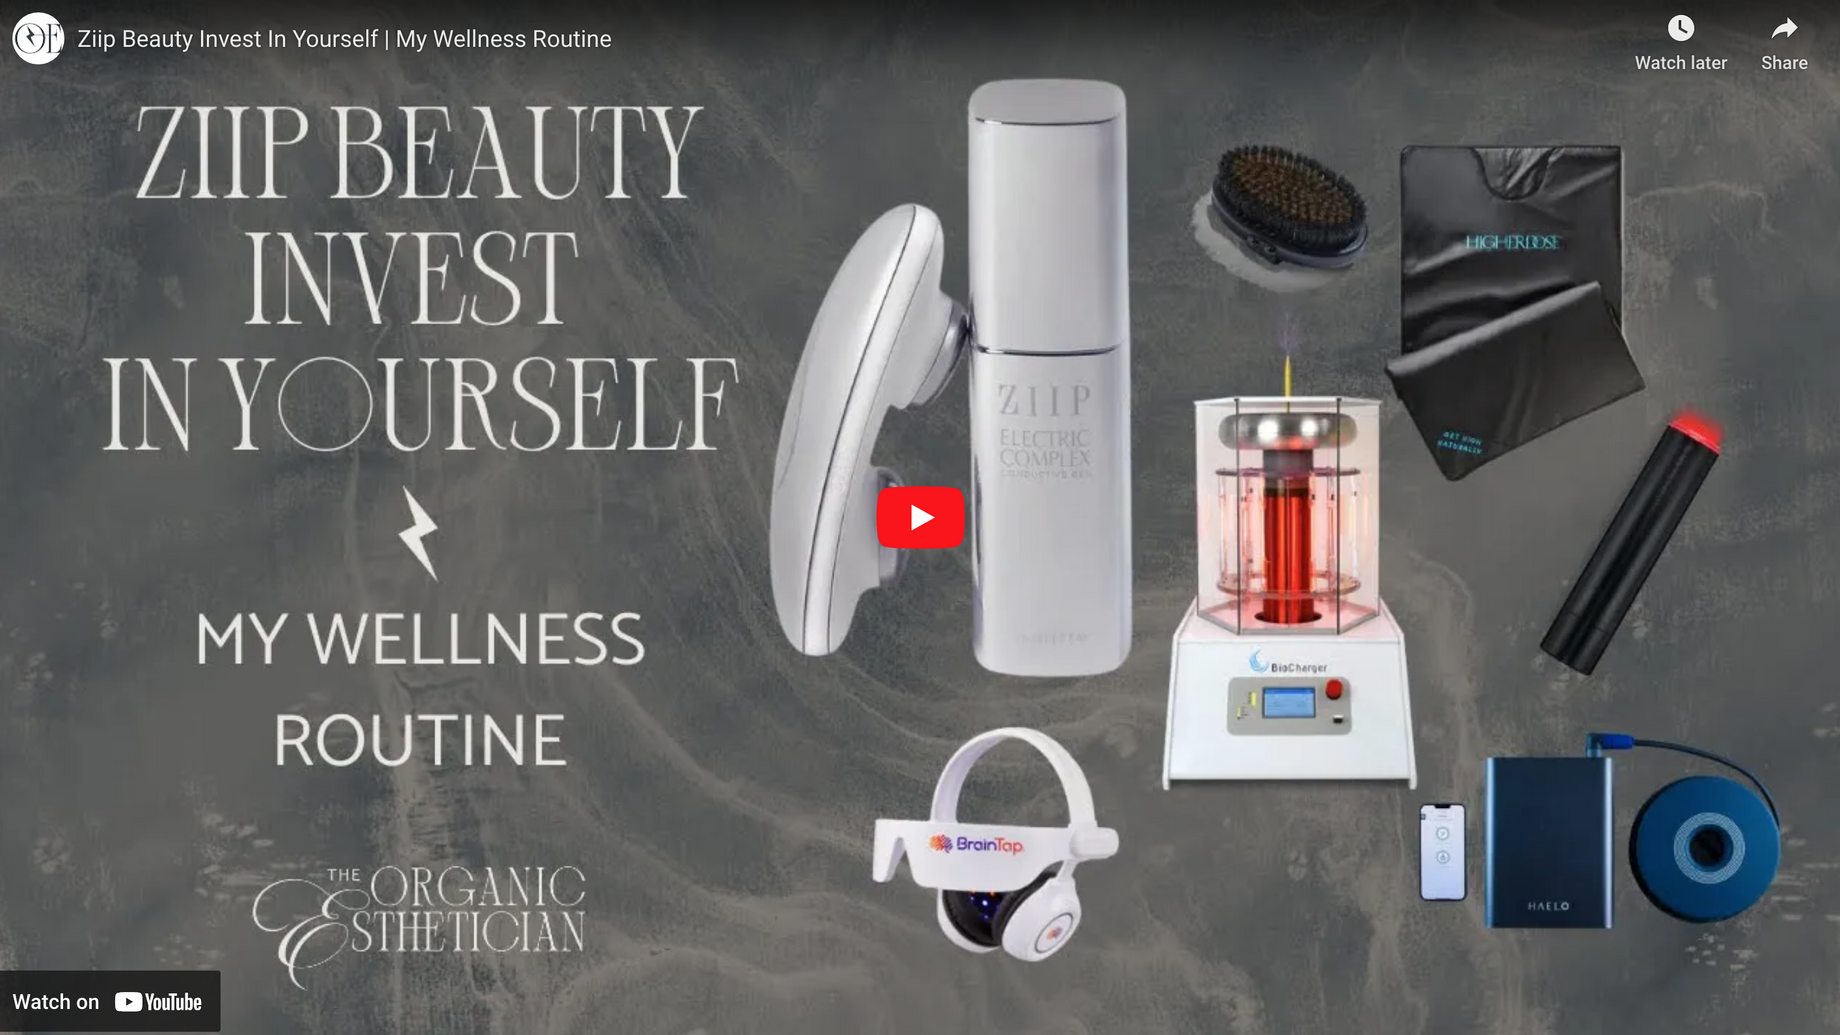 Ziip Beauty Invest In Yourself | My Wellness Routine